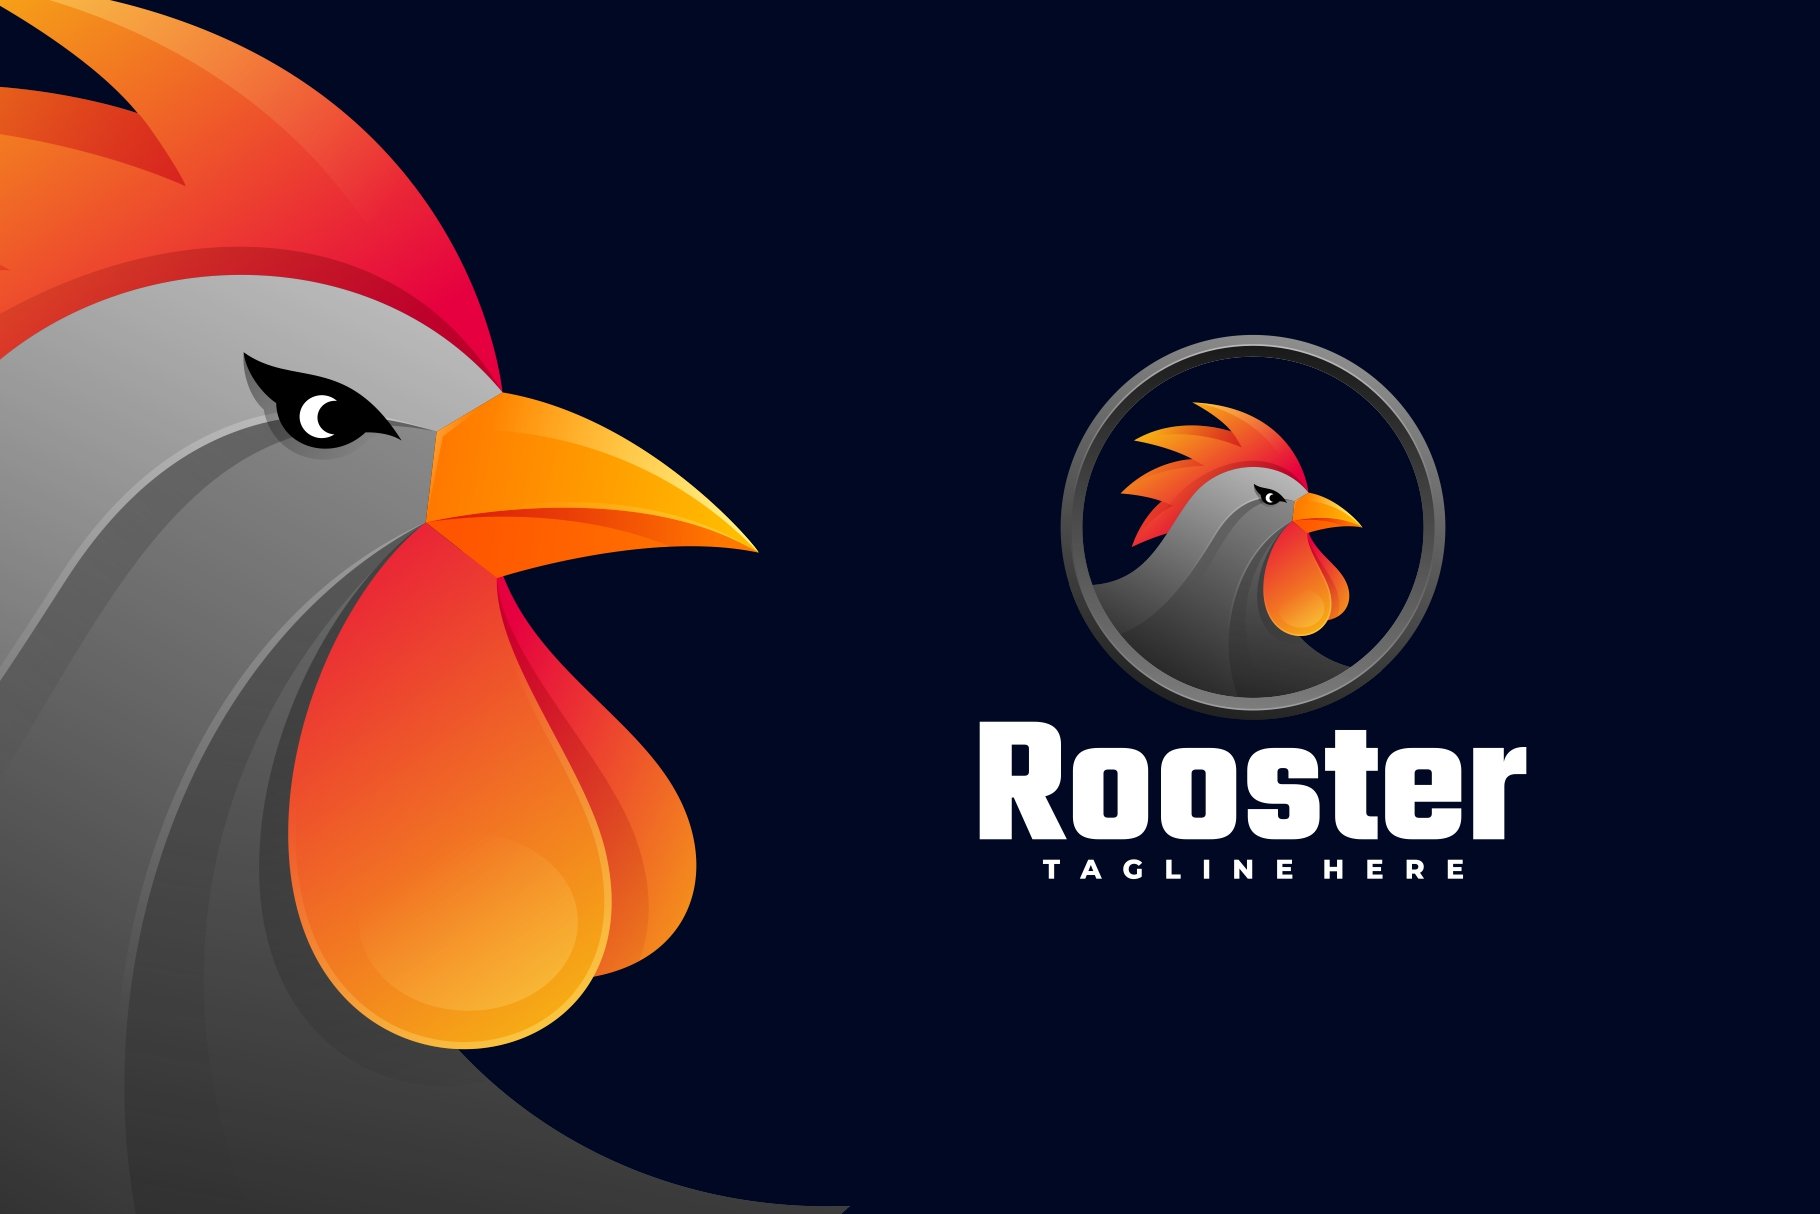 Rooster Gradient Colorful Logo cover image.